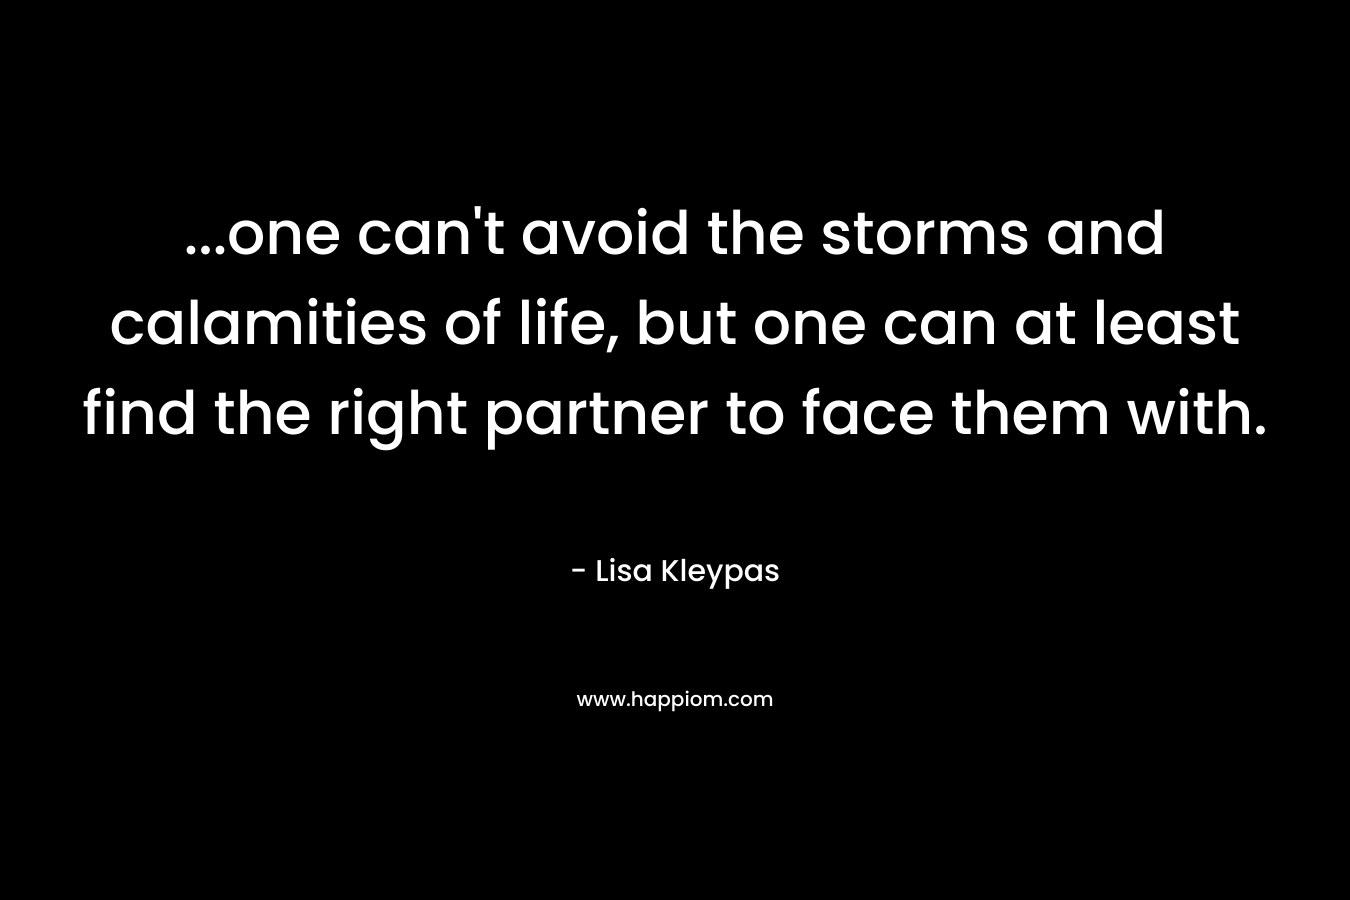 ...one can't avoid the storms and calamities of life, but one can at least find the right partner to face them with.